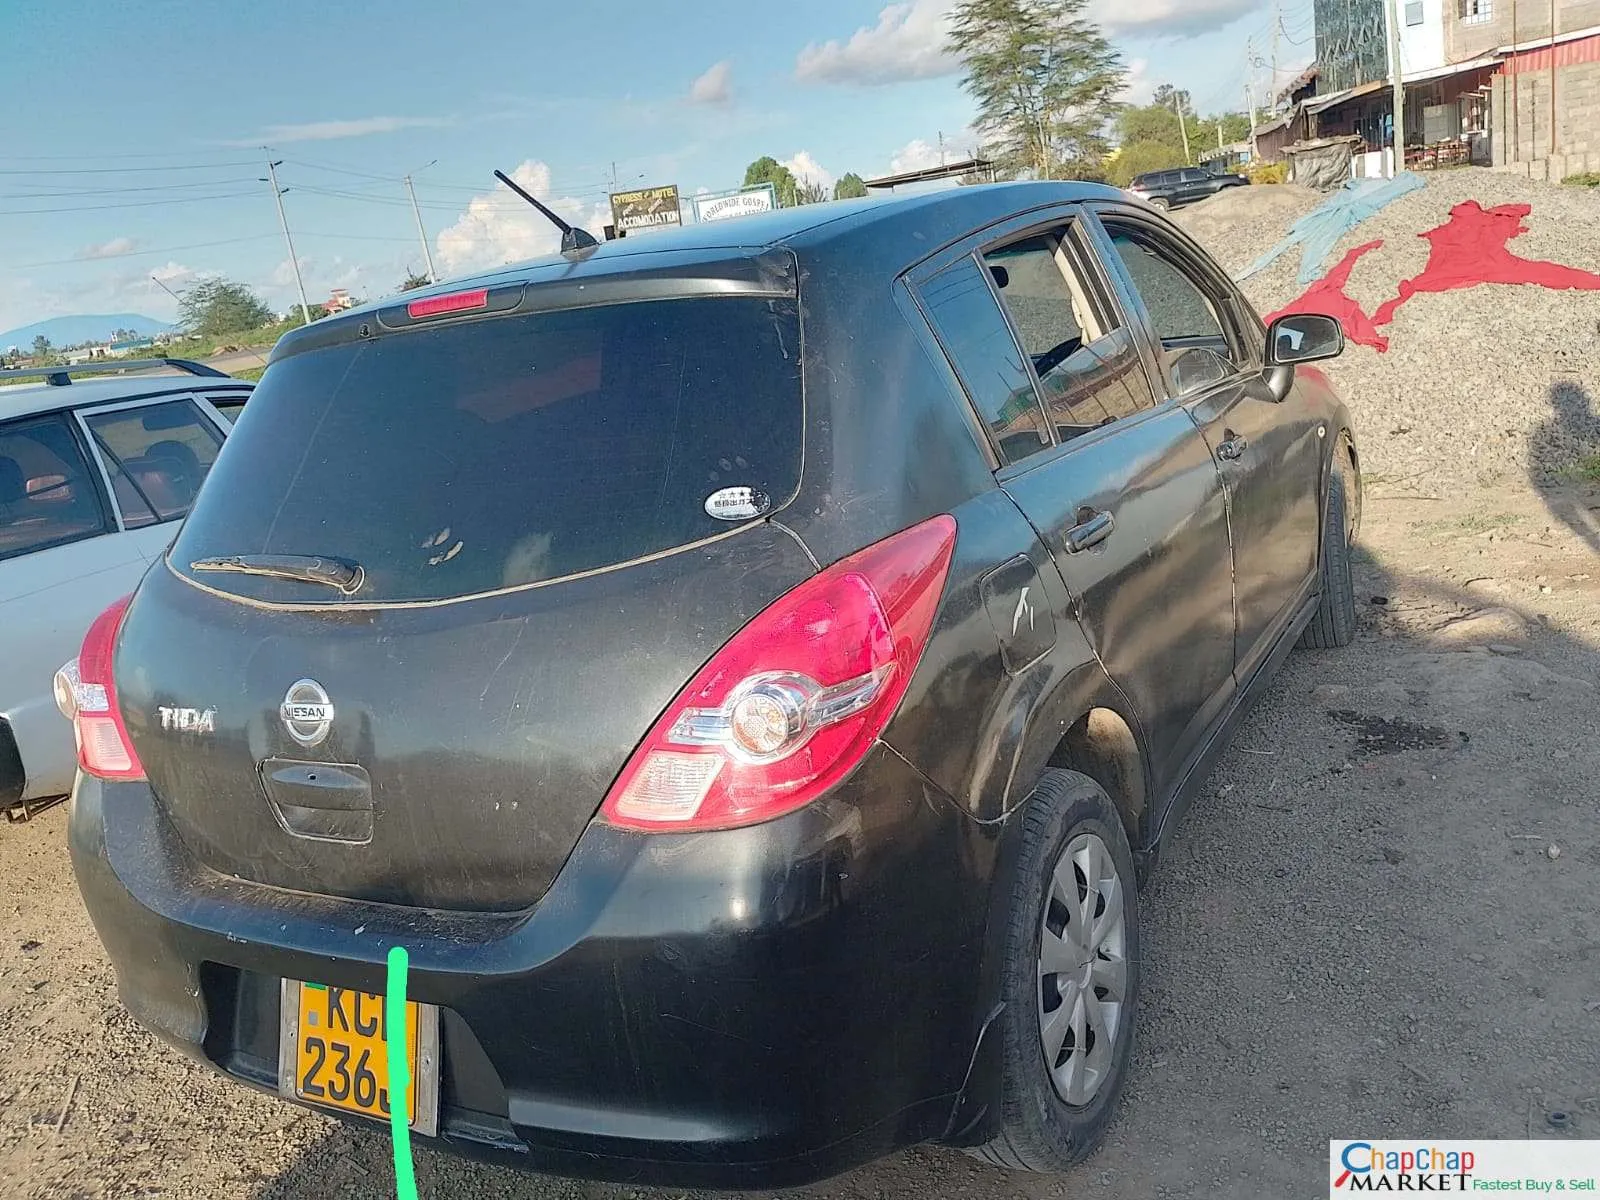 Cars Cars For Sale/Vehicles-Nissan Tiida hatchback QUICK SALE You ONLY Pay 30% Deposit Trade in Ok EXCLUSIVE 2